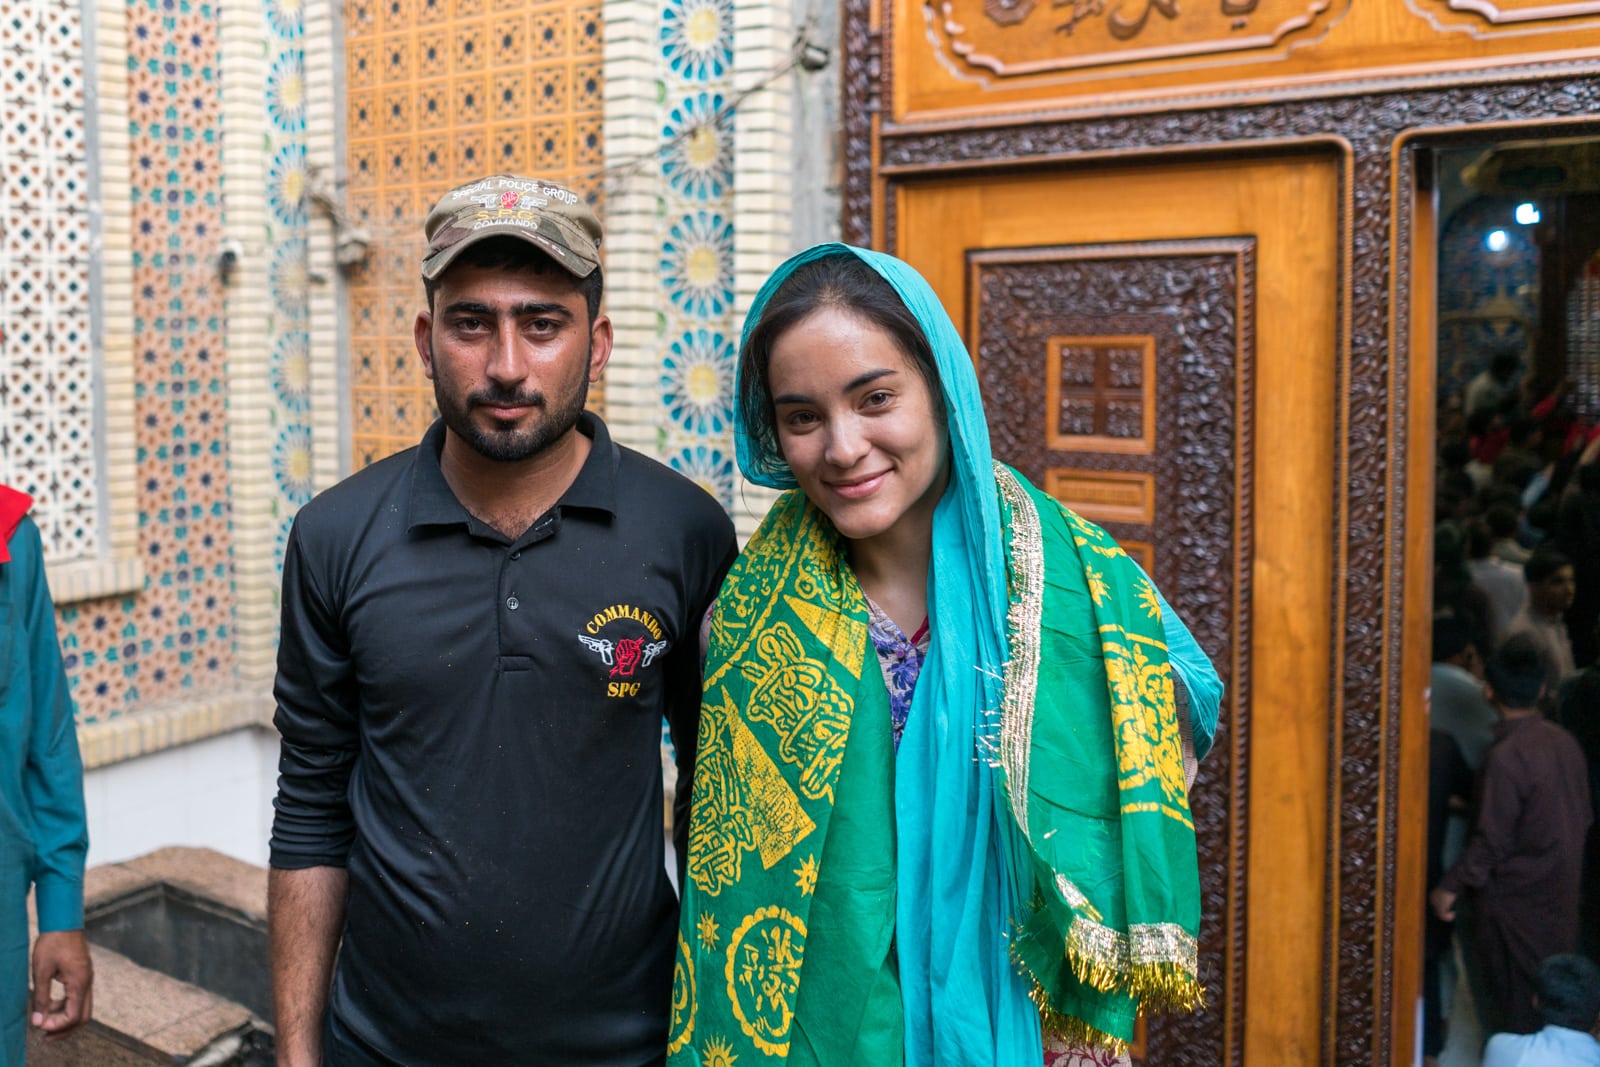 Female traveler with a security escort in Sehwan Sharif, Pakistan